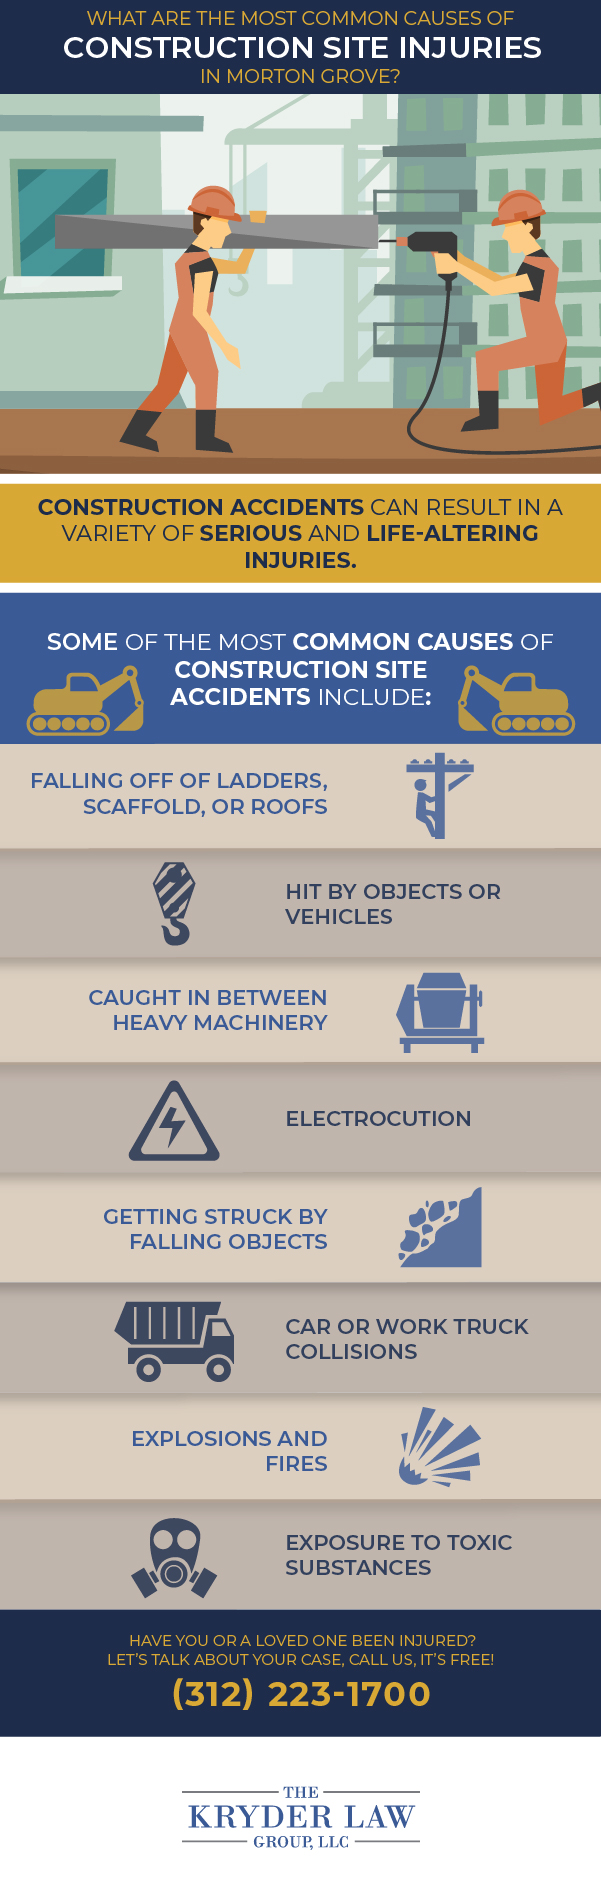 The Benefits of Hiring a Morton Grove Construction Accident Lawyer Infographic